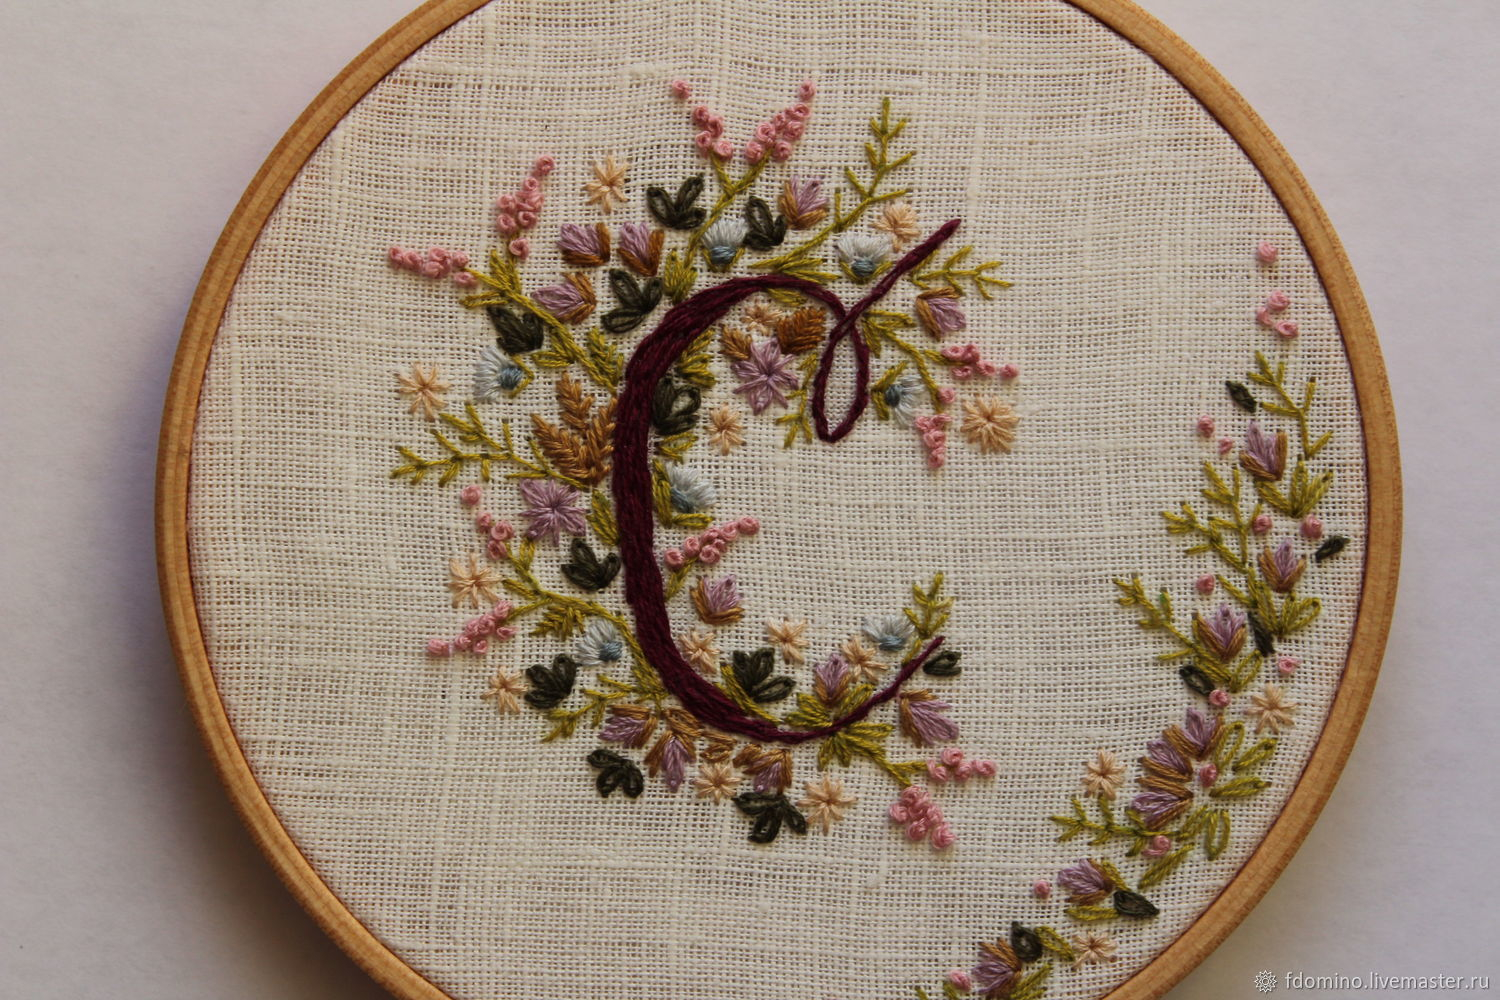 Monogram Patterns For Embroidery Embroidered Monogram Embroidered Flowers Panels On The Wall Embroidered Pattern